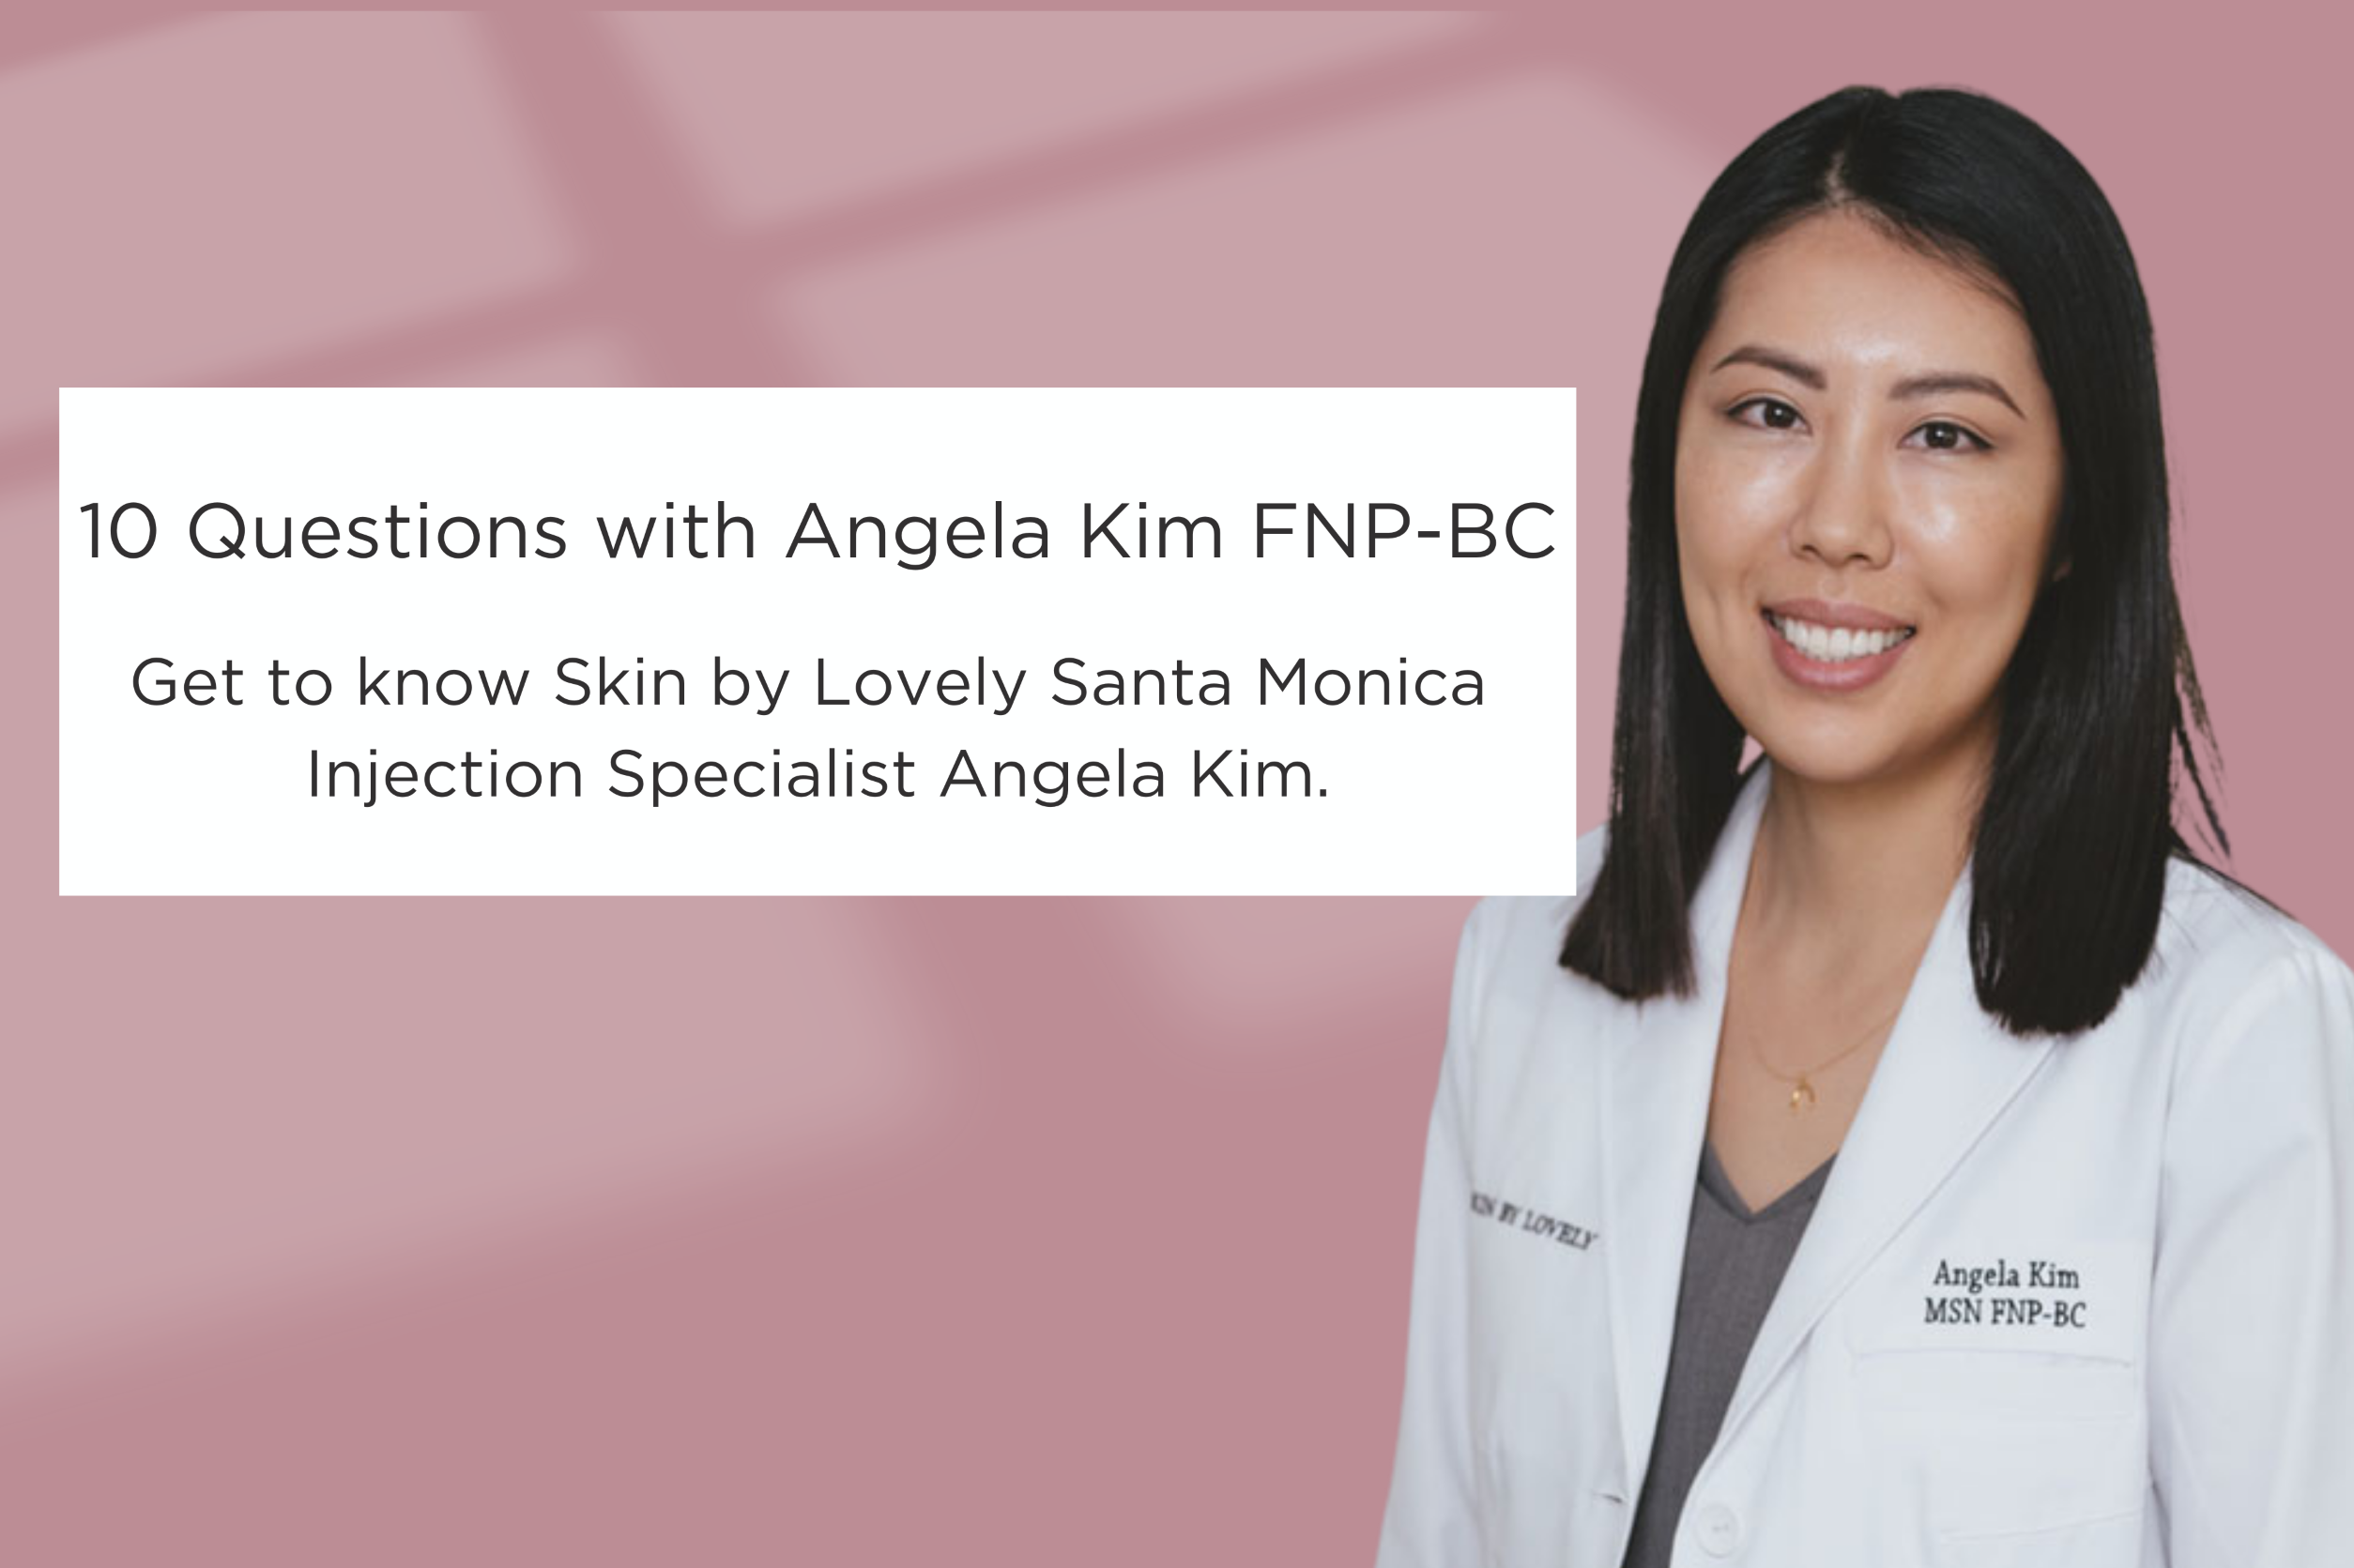 10 Questions with Angela Kim FNP-BC